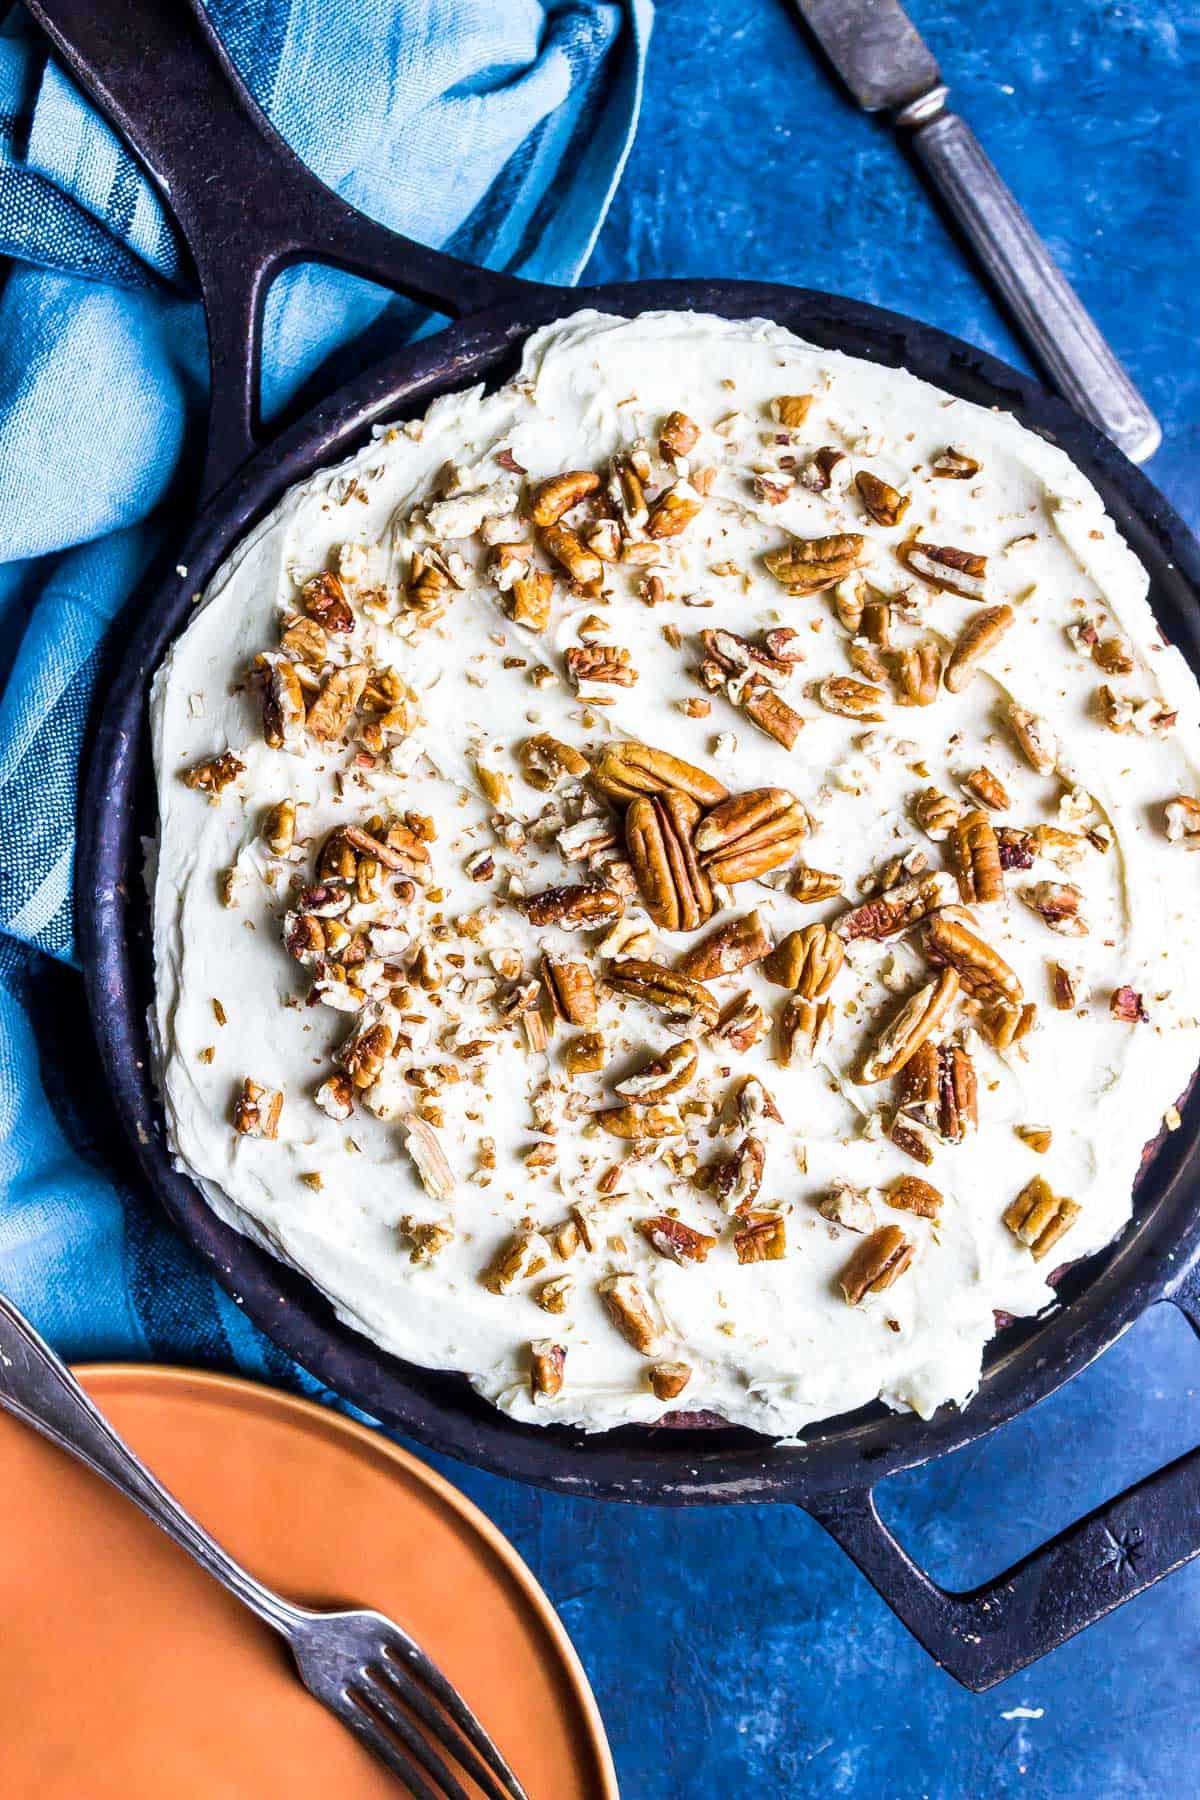 Overhead shot: cast iron skillet filled with Keto Carrot Cake